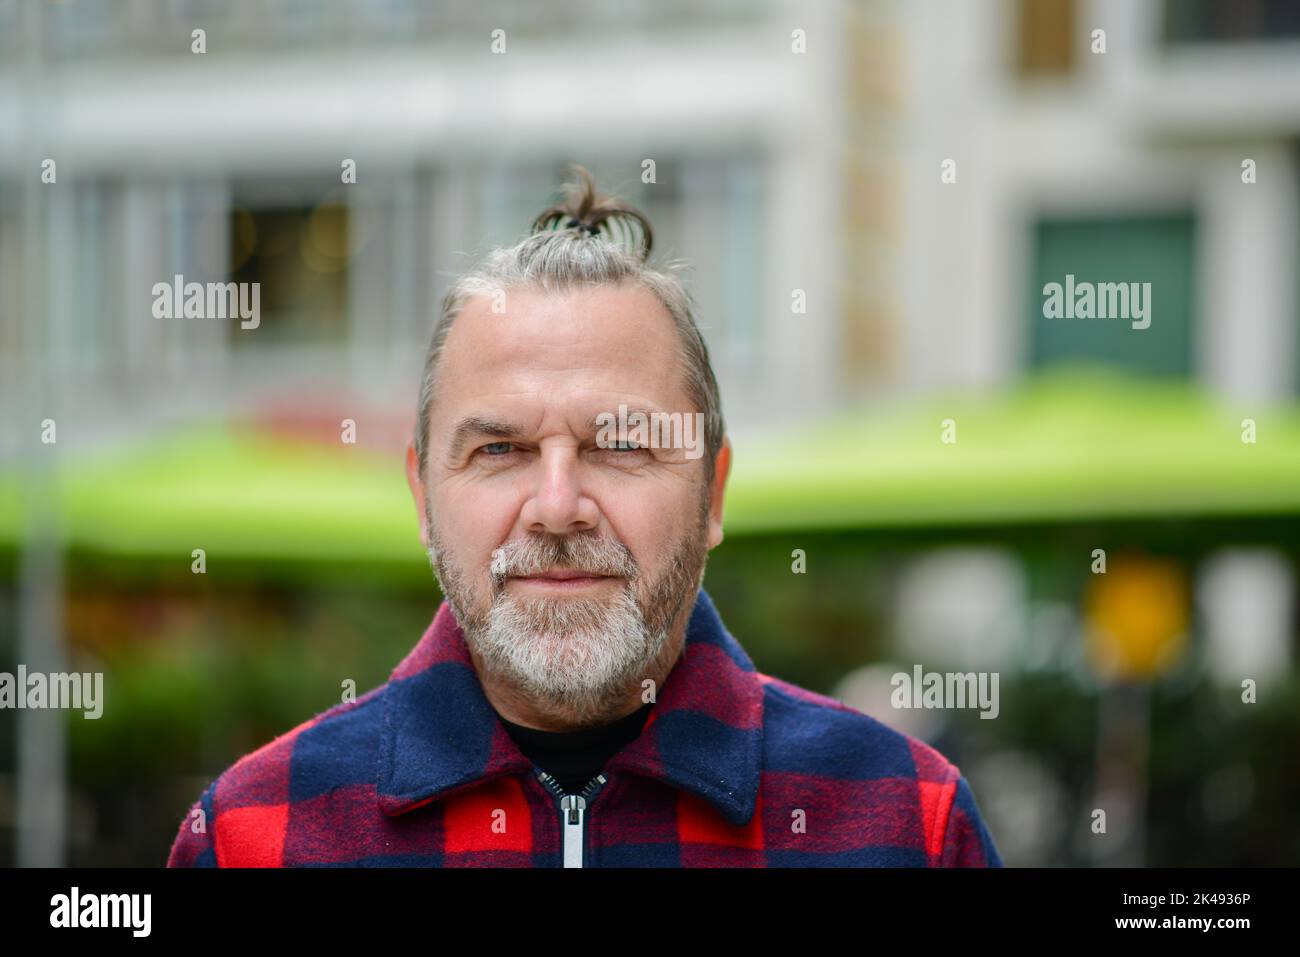 Middle aged man with a messy bun in a red and blue lumberjack style jacket is standing in a shopping street with a soft smile Stock Photo